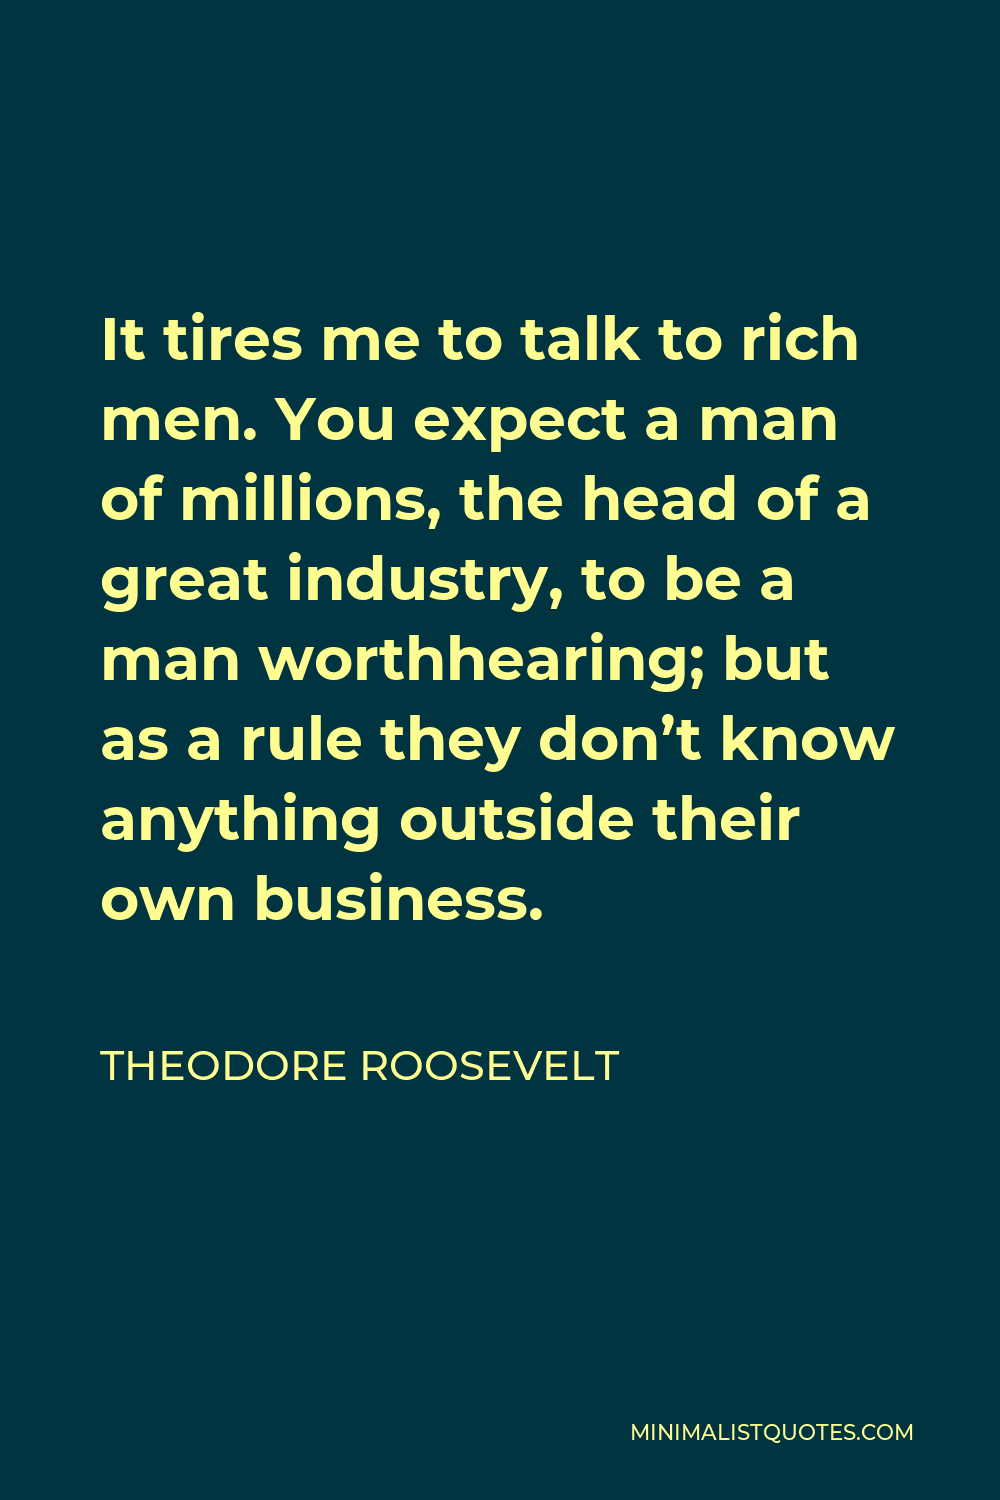 Theodore Roosevelt Quote - It tires me to talk to rich men. You expect a man of millions, the head of a great industry, to be a man worthhearing; but as a rule they don’t know anything outside their own business.